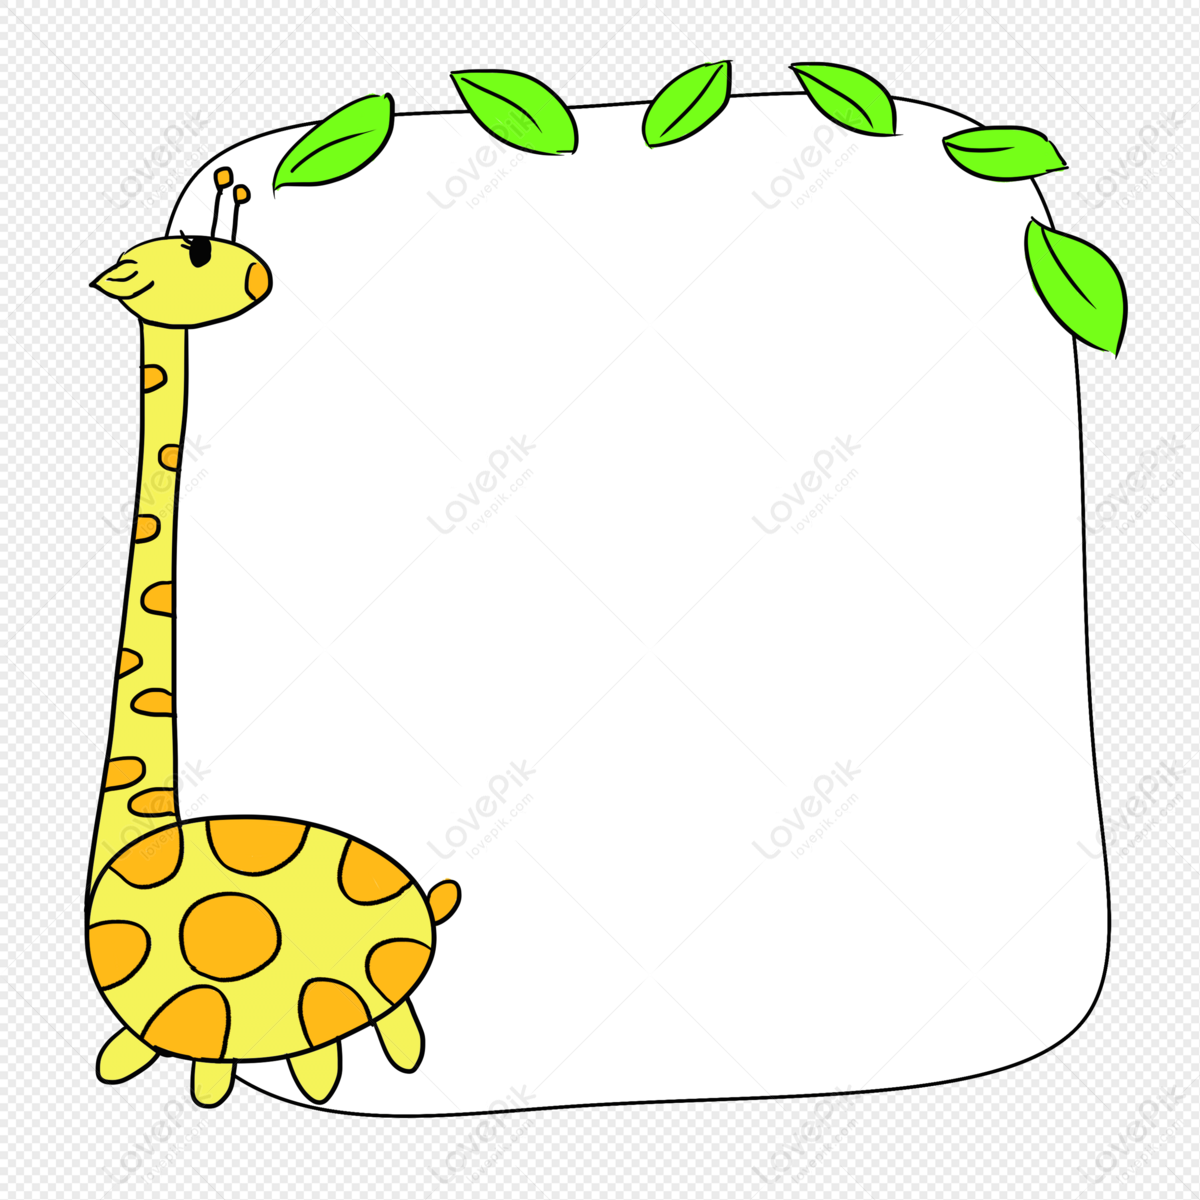 Hand Drawn Cartoon Giraffe Border Dialog PNG Transparent Image And Clipart  Image For Free Download - Lovepik | 401439507